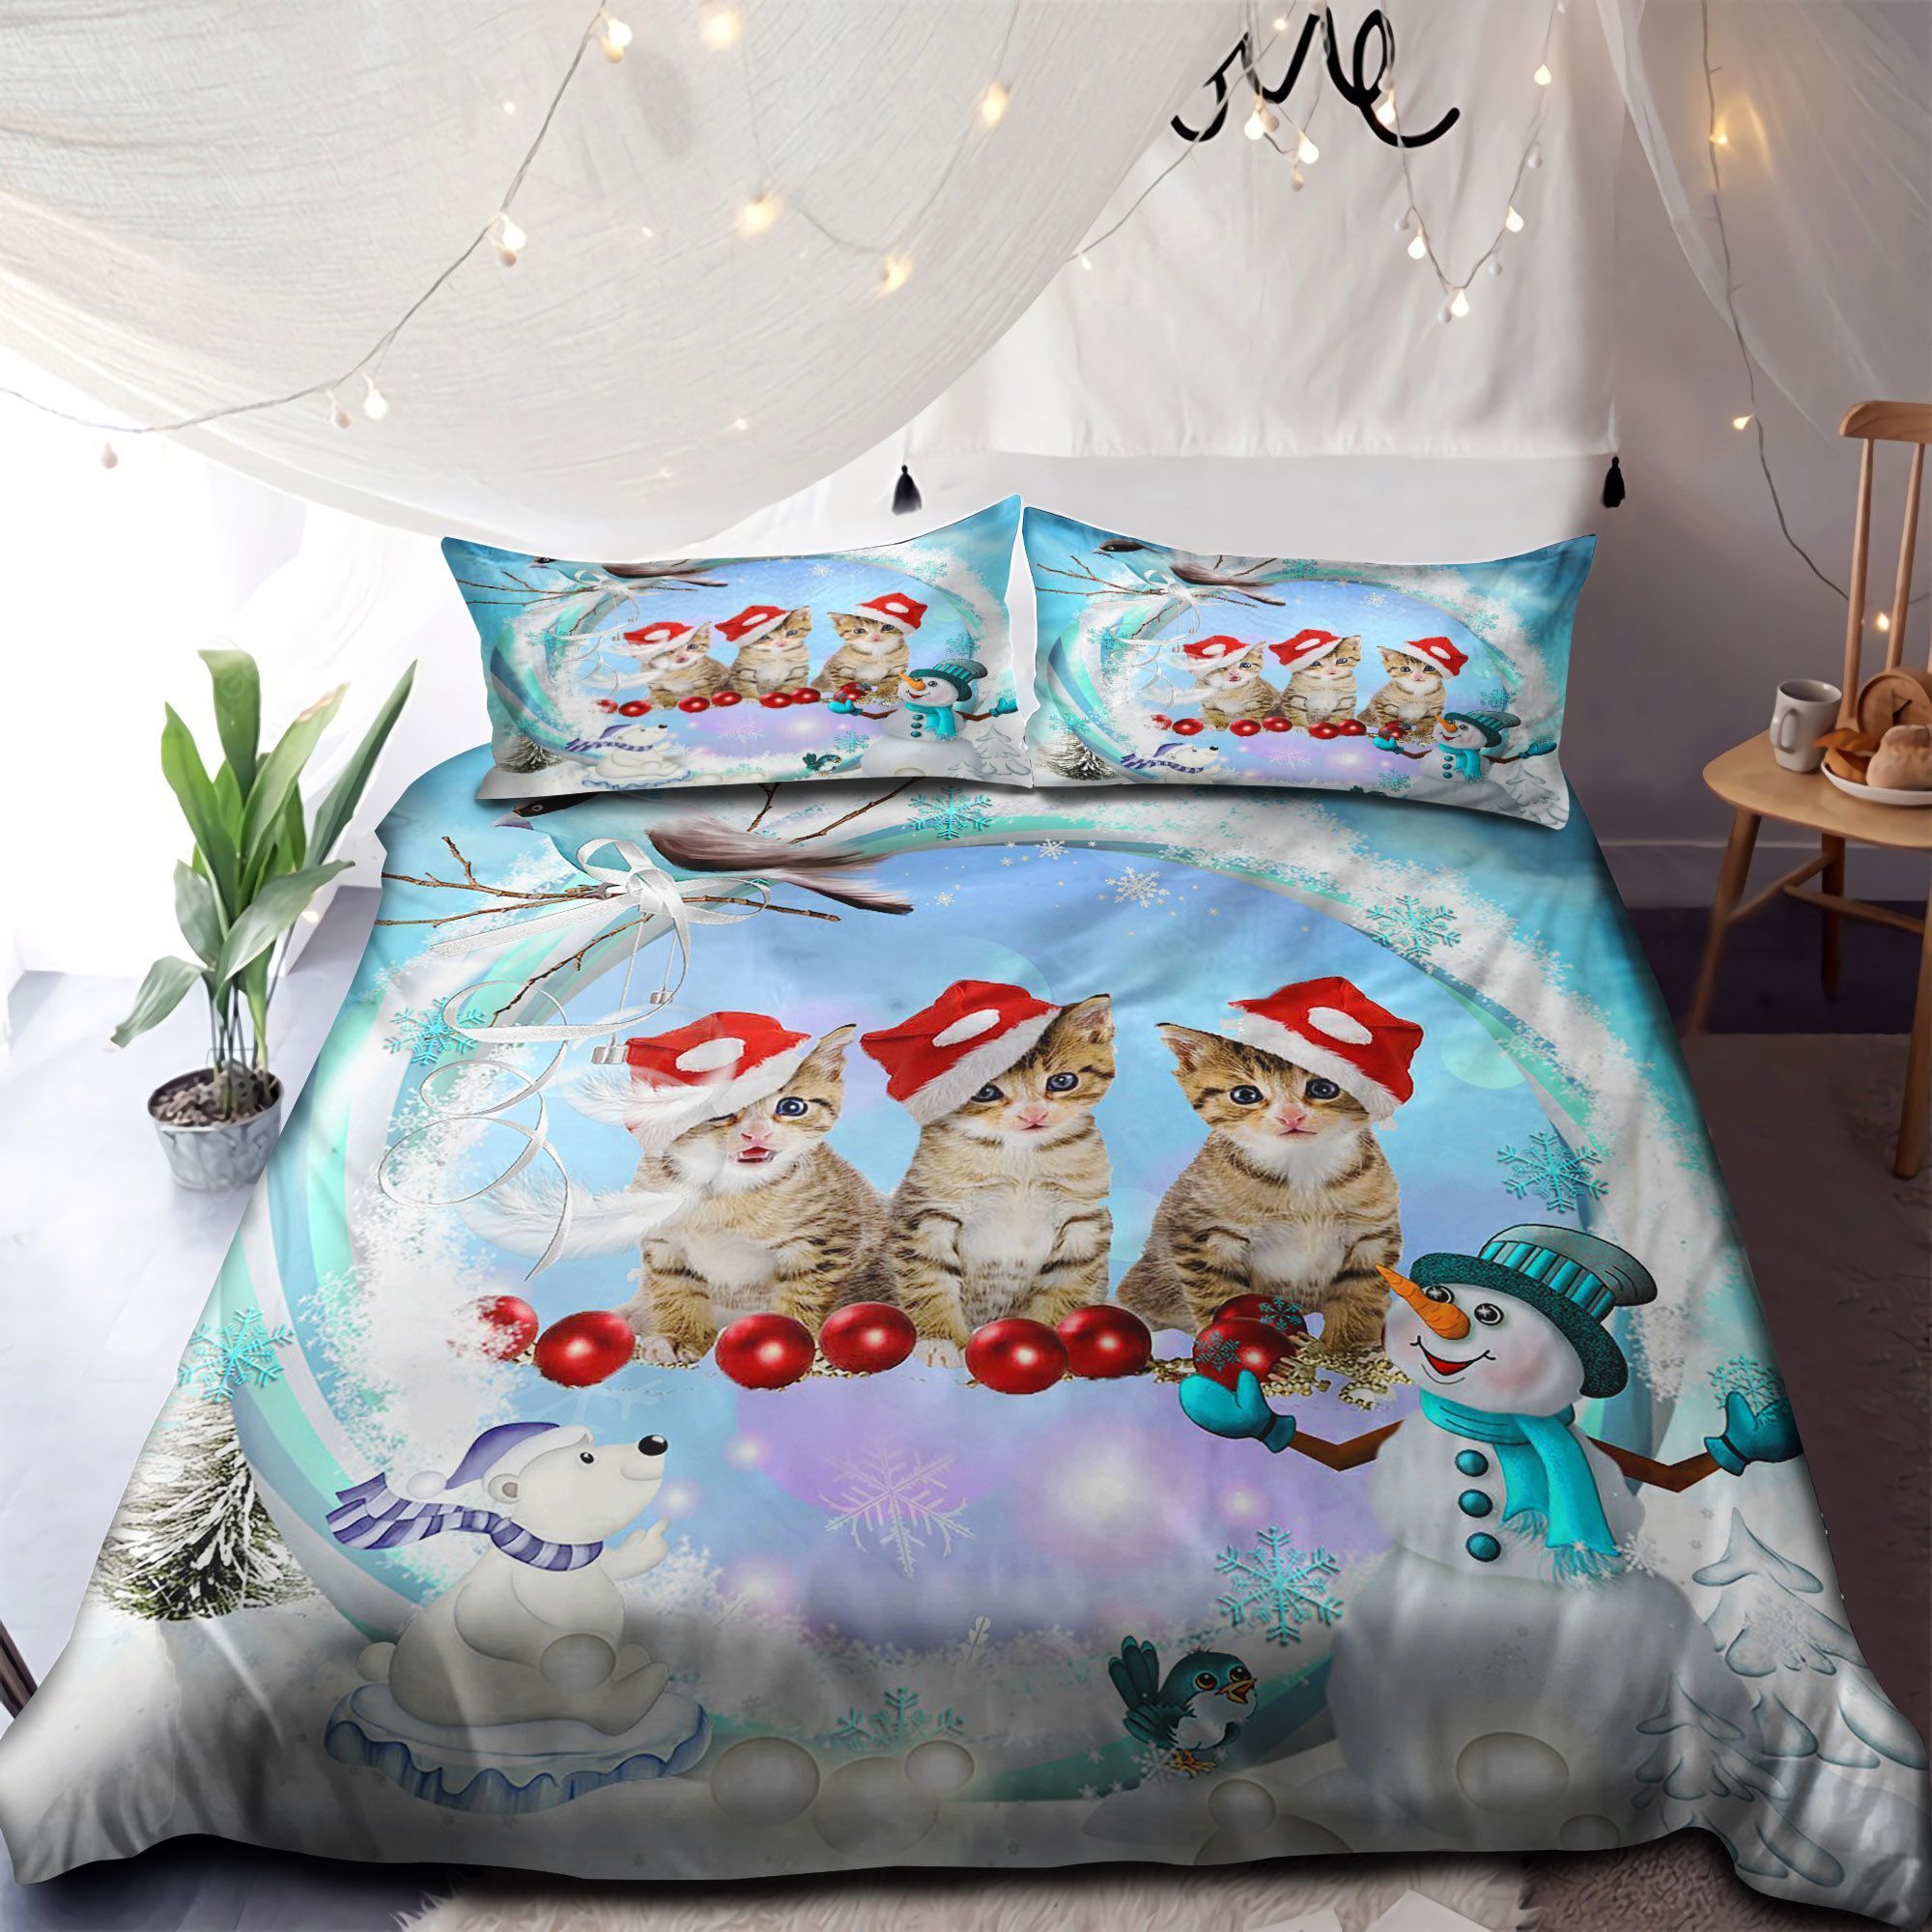 Three Lovely Cats Merry Christmas Bedding Set Cotton Bed Sheets Spread Comforter Duvet Cover Bedding Sets